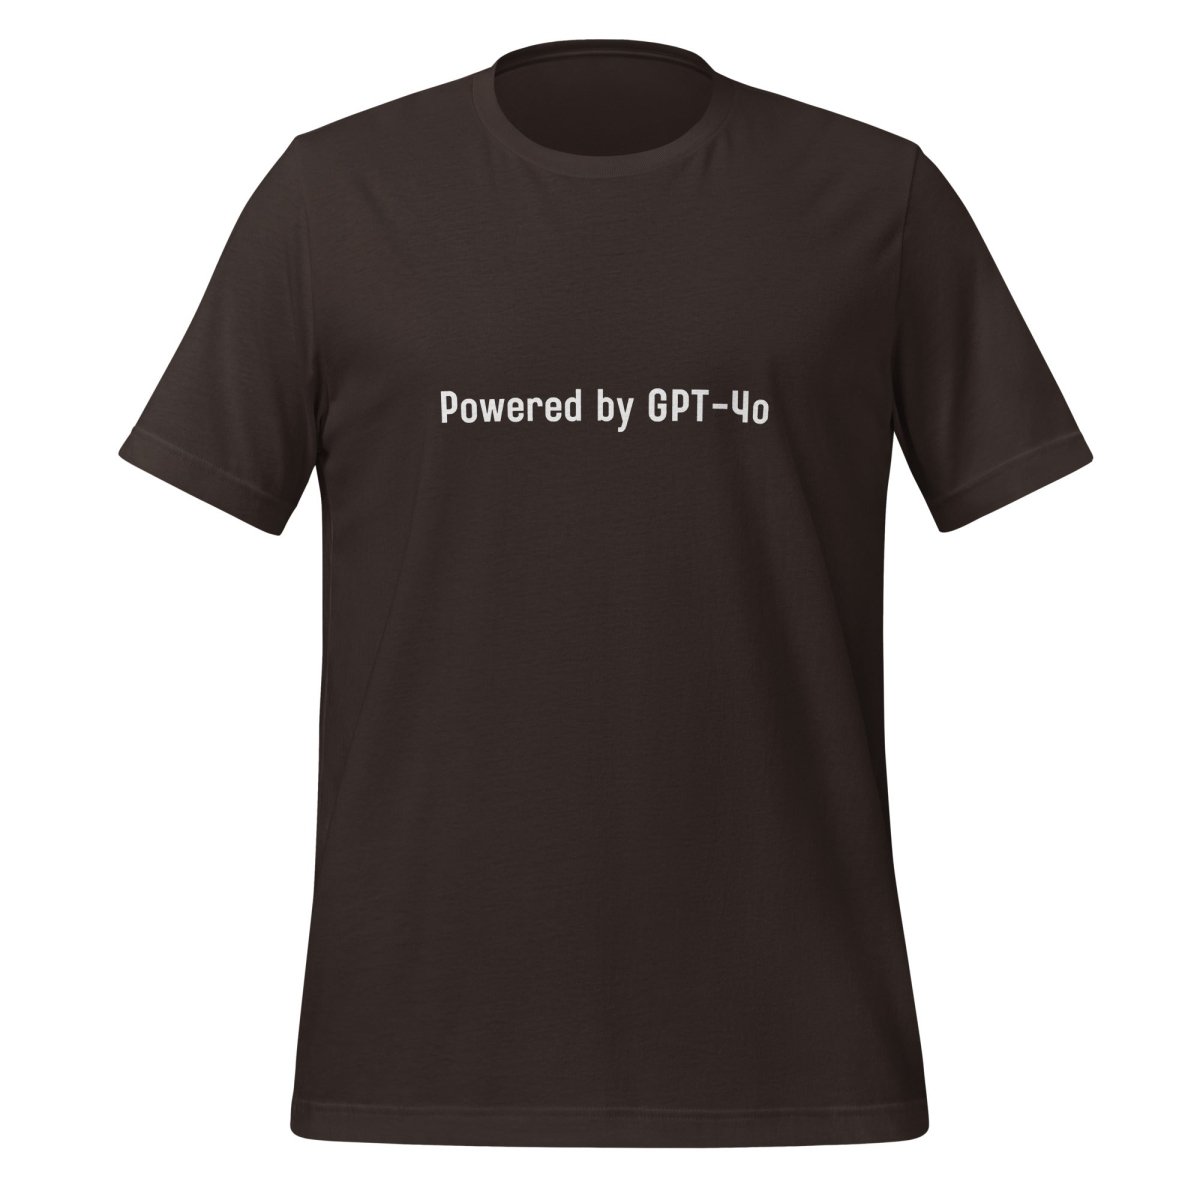 Powered by GPT - 4o T - Shirt 3 (unisex) - Brown - AI Store